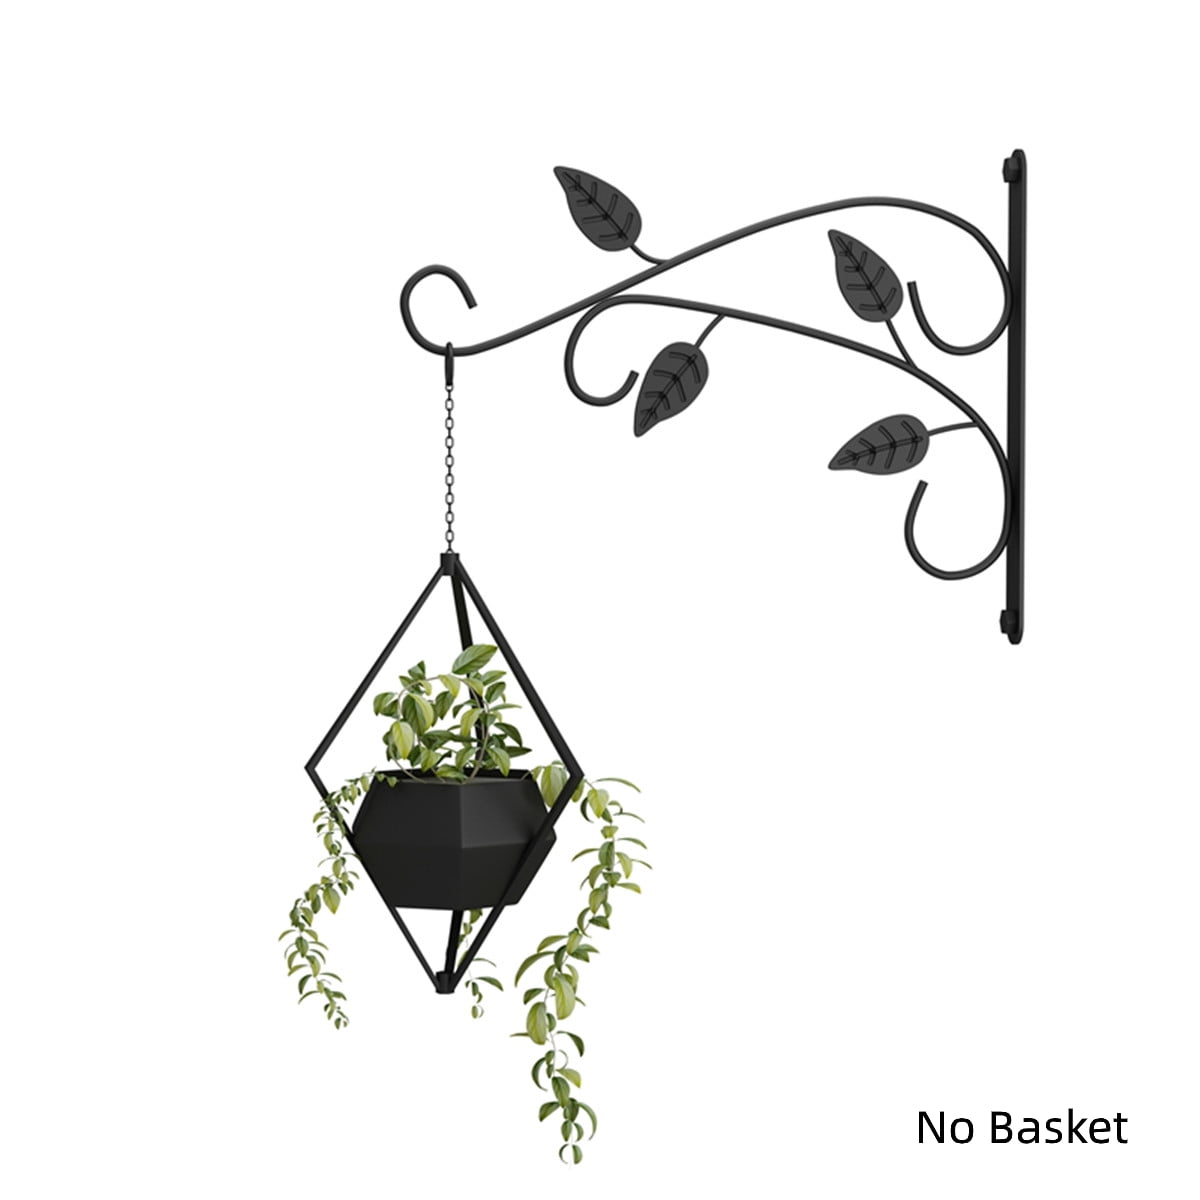 Decor Indoor & Outdoor Black FEED GARDEN 12-inch Hanging Plant Bracket 2-Pack Wrought Iron Wall Hooks for Bird Feeders Lanterns Wind Chimes with Screws